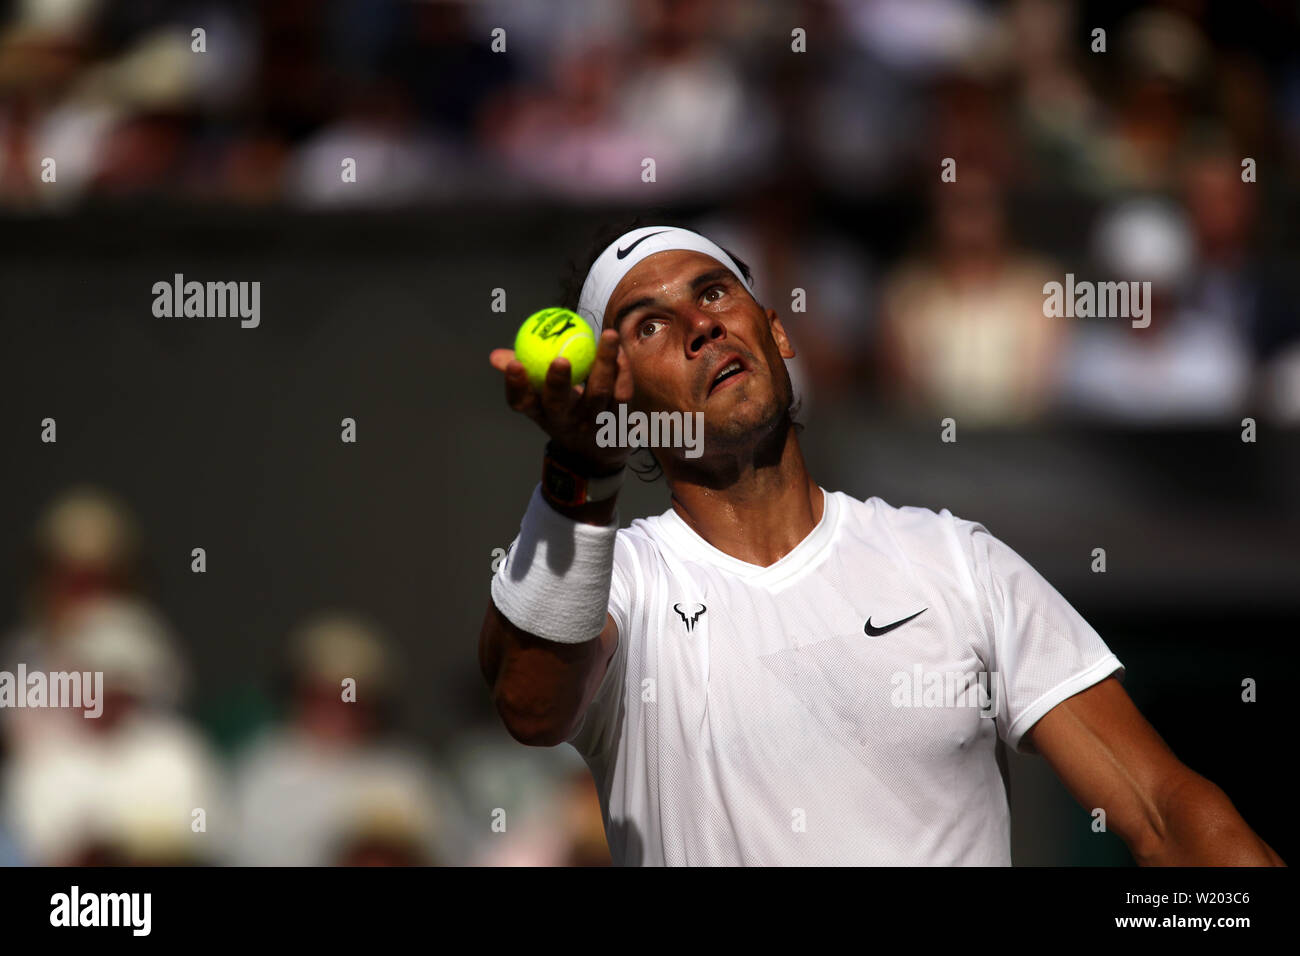 London, UK. 04th July, 2019. Wimbledon, 4 July 2019 - Rafael Nadal preparing to serve during his second round match against Nick Kyrgios today at Wimbledon. Credit: Adam Stoltman/Alamy Live News Stock Photo